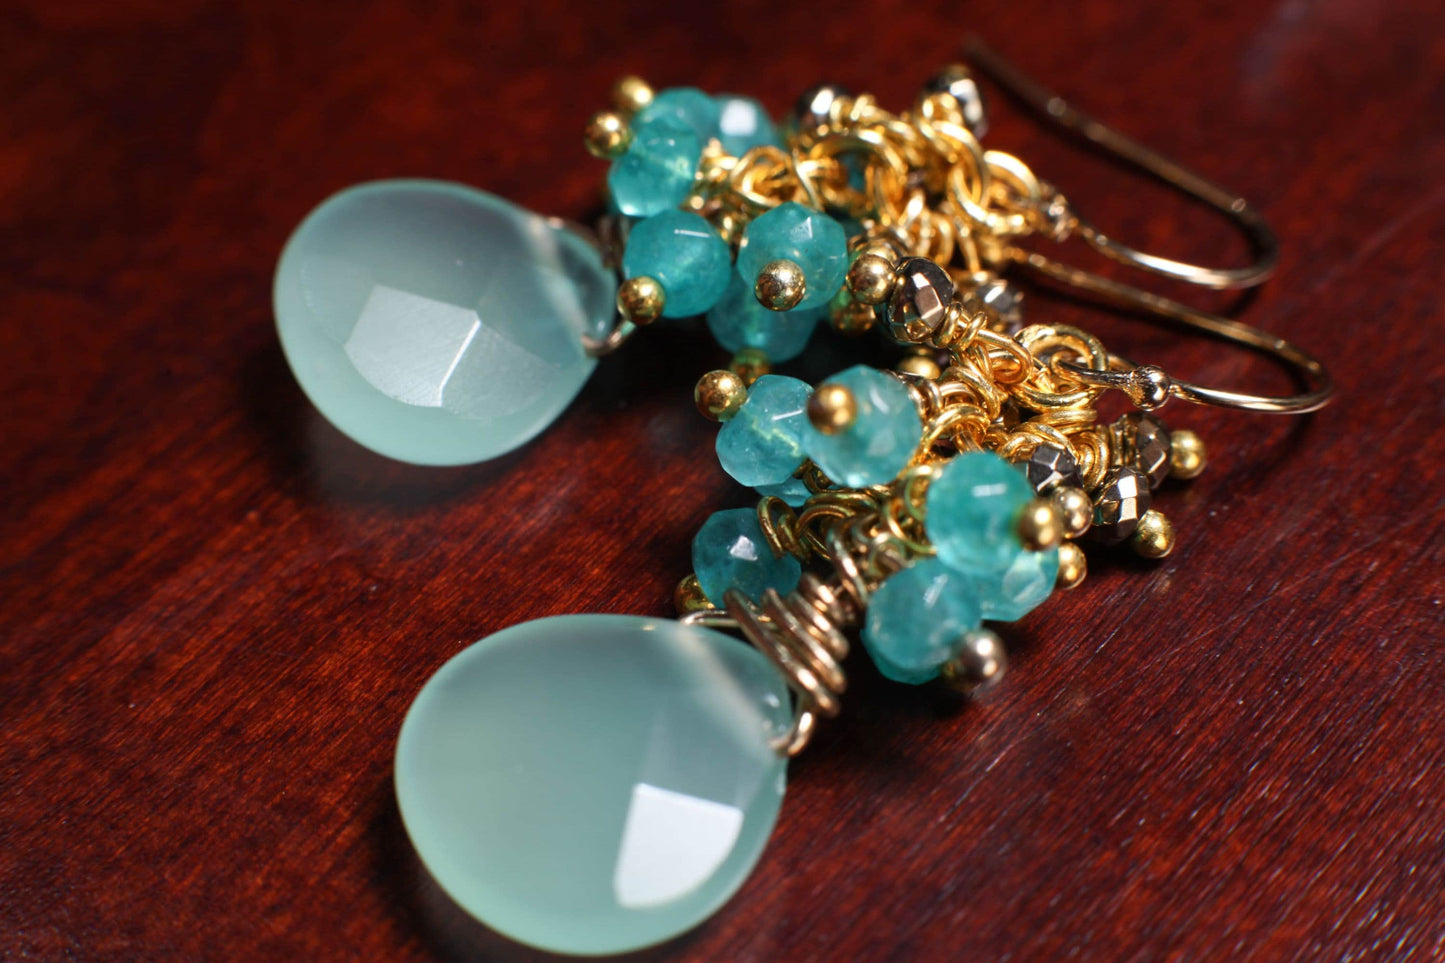 Natural Aqua Chalcedony 13mm Heart Briolette dangling ,Apatite, Pyrite Cluster, Sterling Silver or 14K Gold Filled Earrings Bridesmaid, Gift